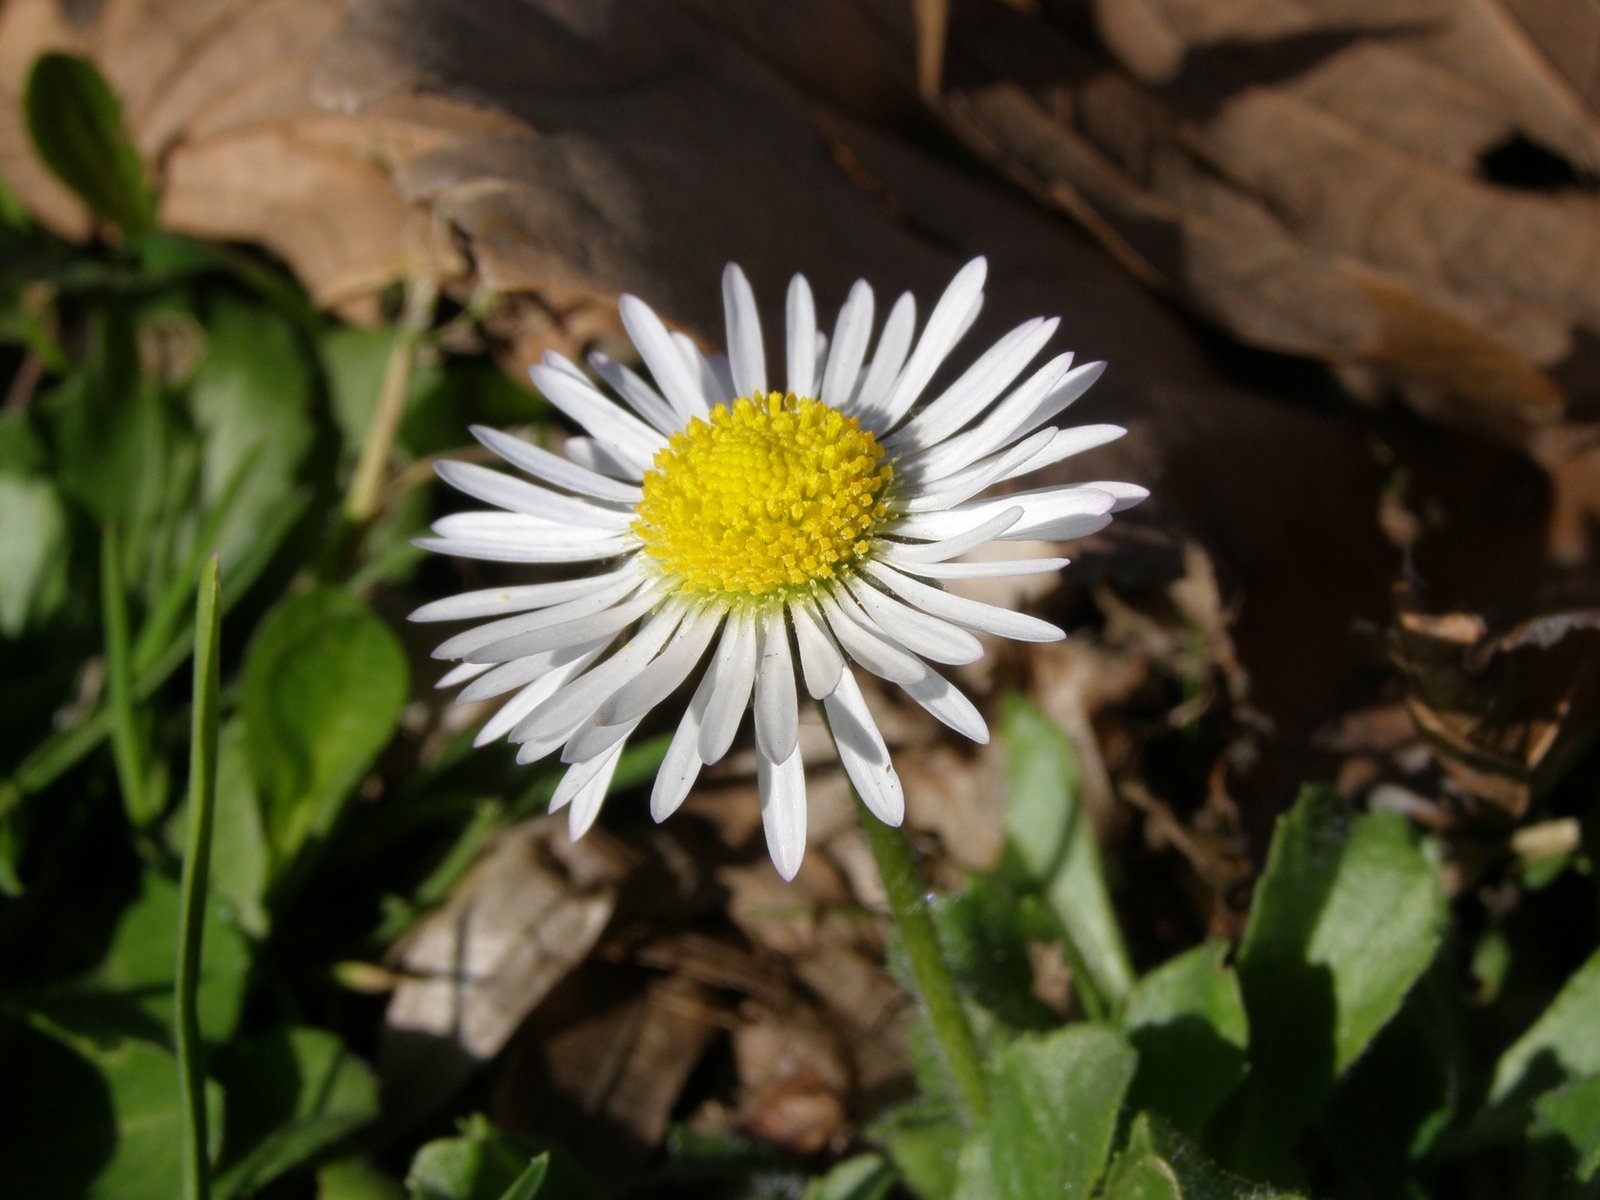 the large white flower has yellow center